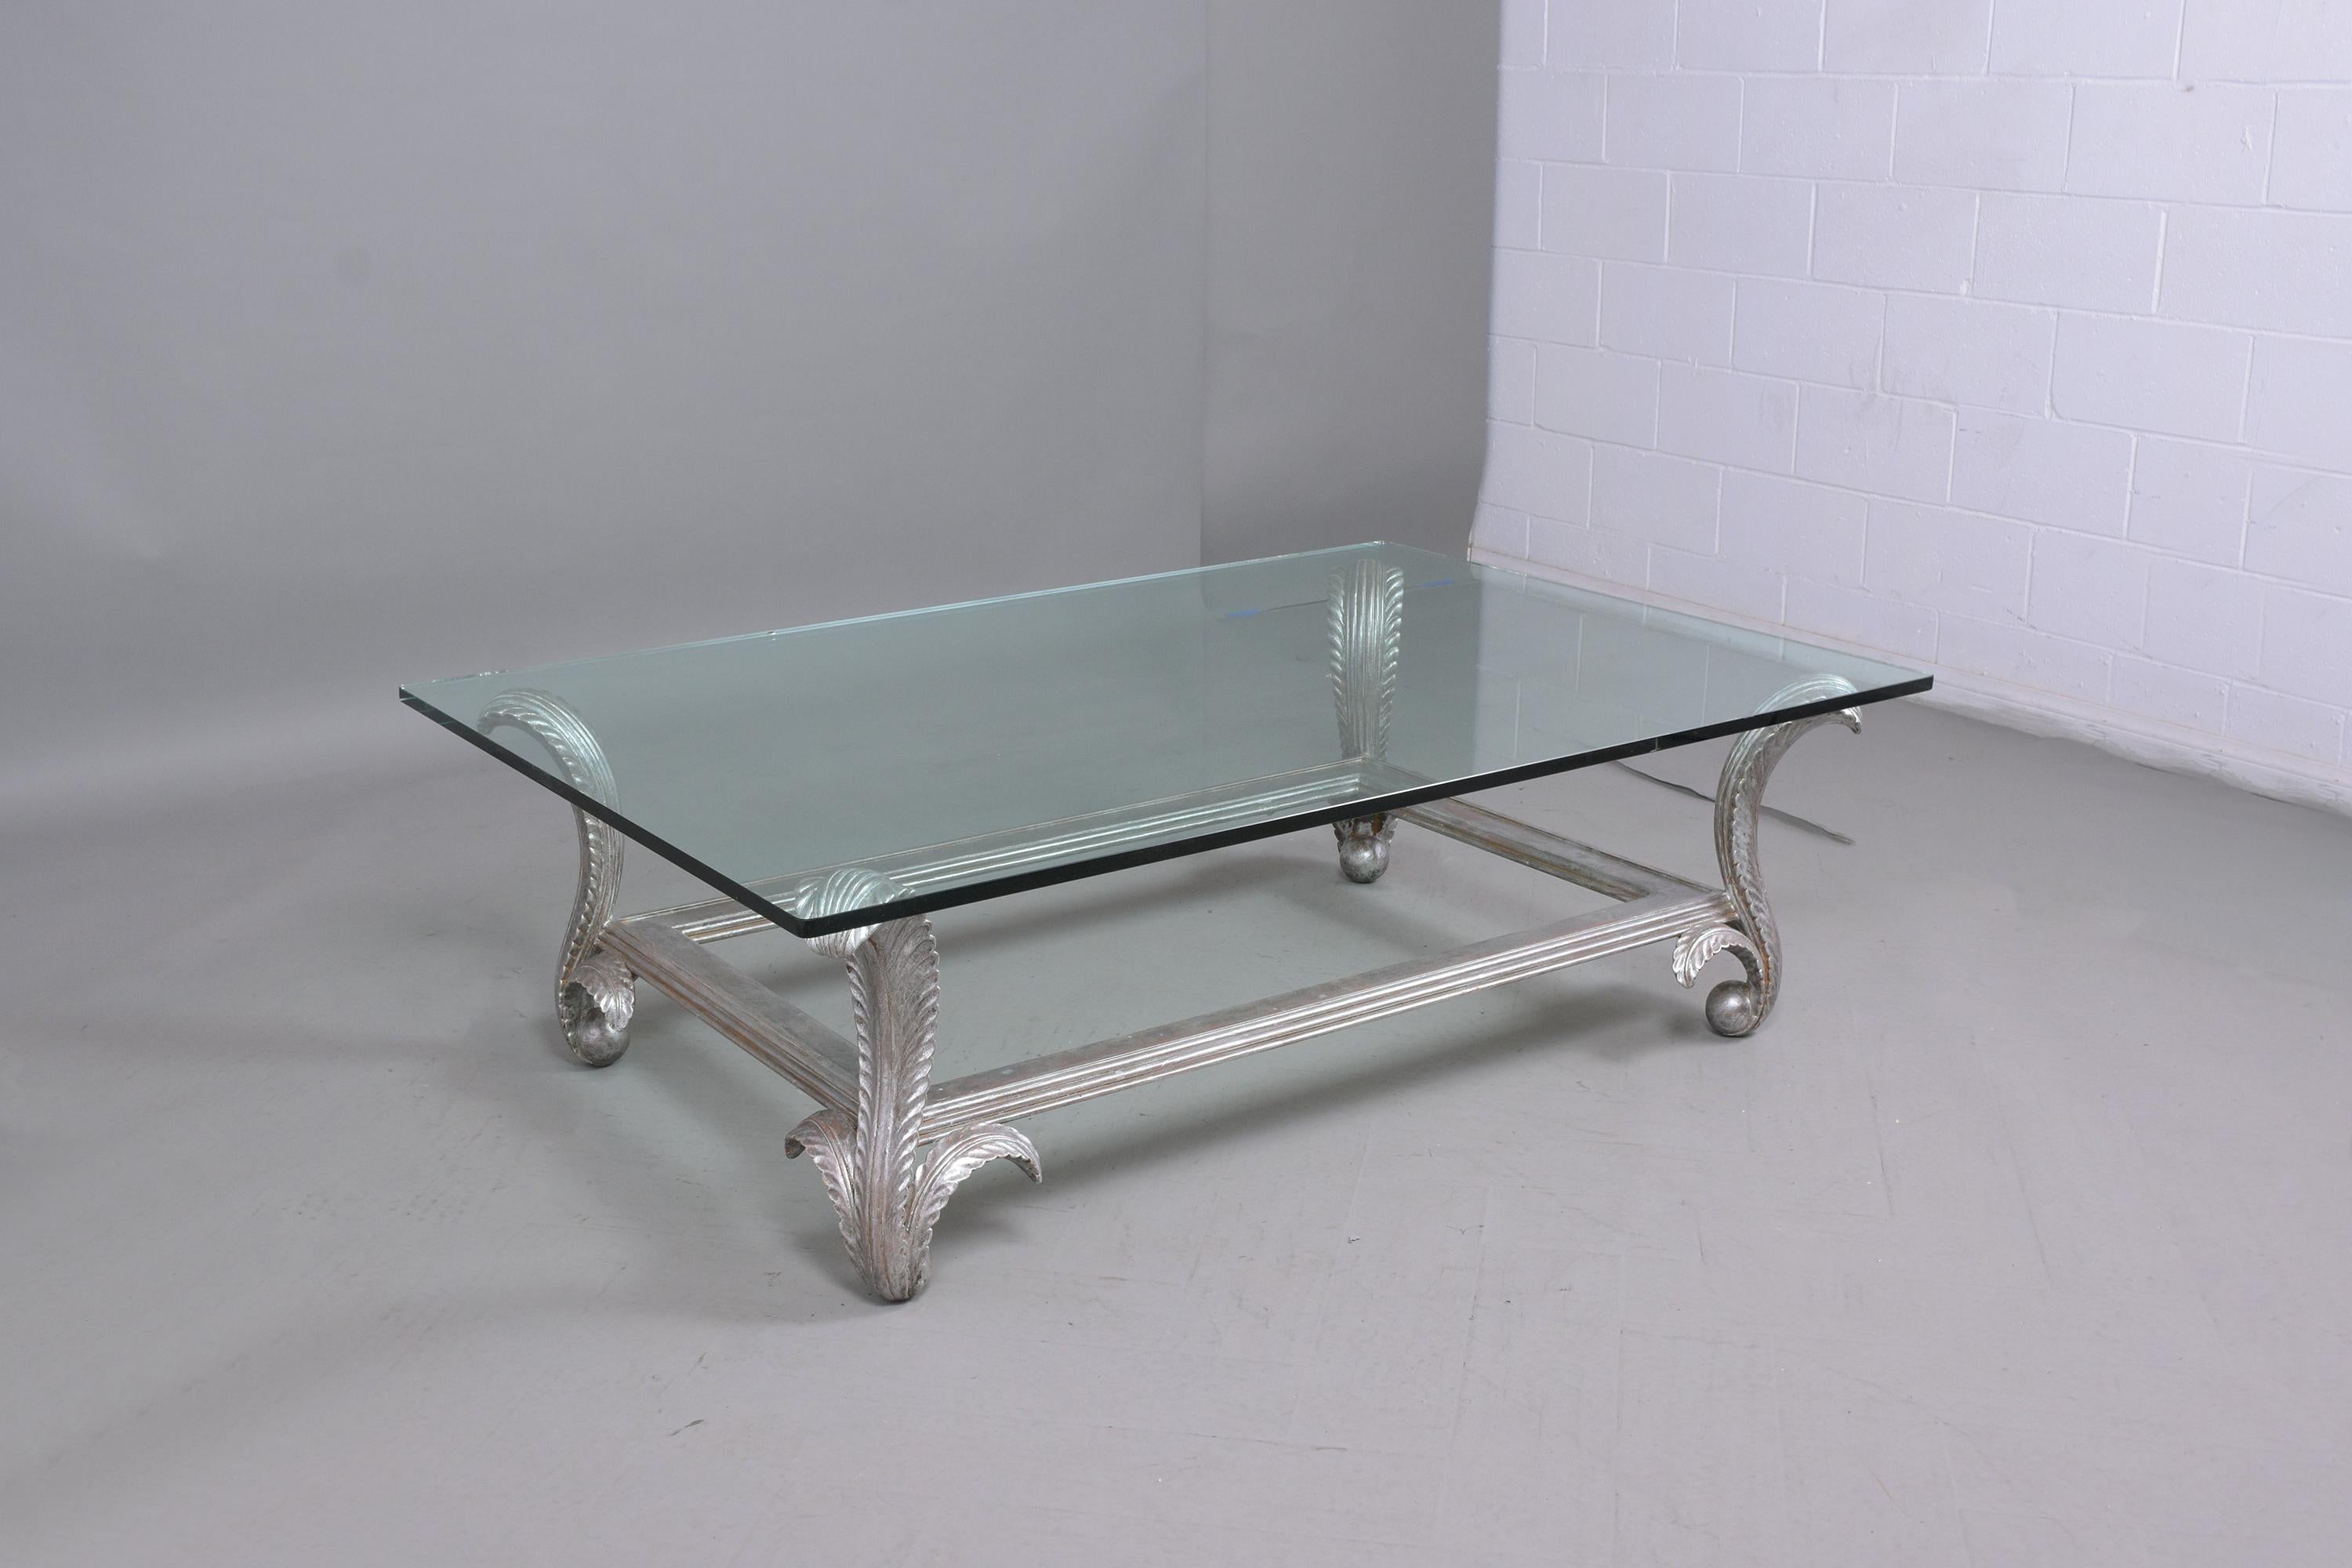 Step into the world of vintage glamour with our 1970s Vintage Coffee Table, a piece that seamlessly combines elegance and craftsmanship. This coffee table has been expertly hand-crafted from wood and meticulously restored to excellent condition by